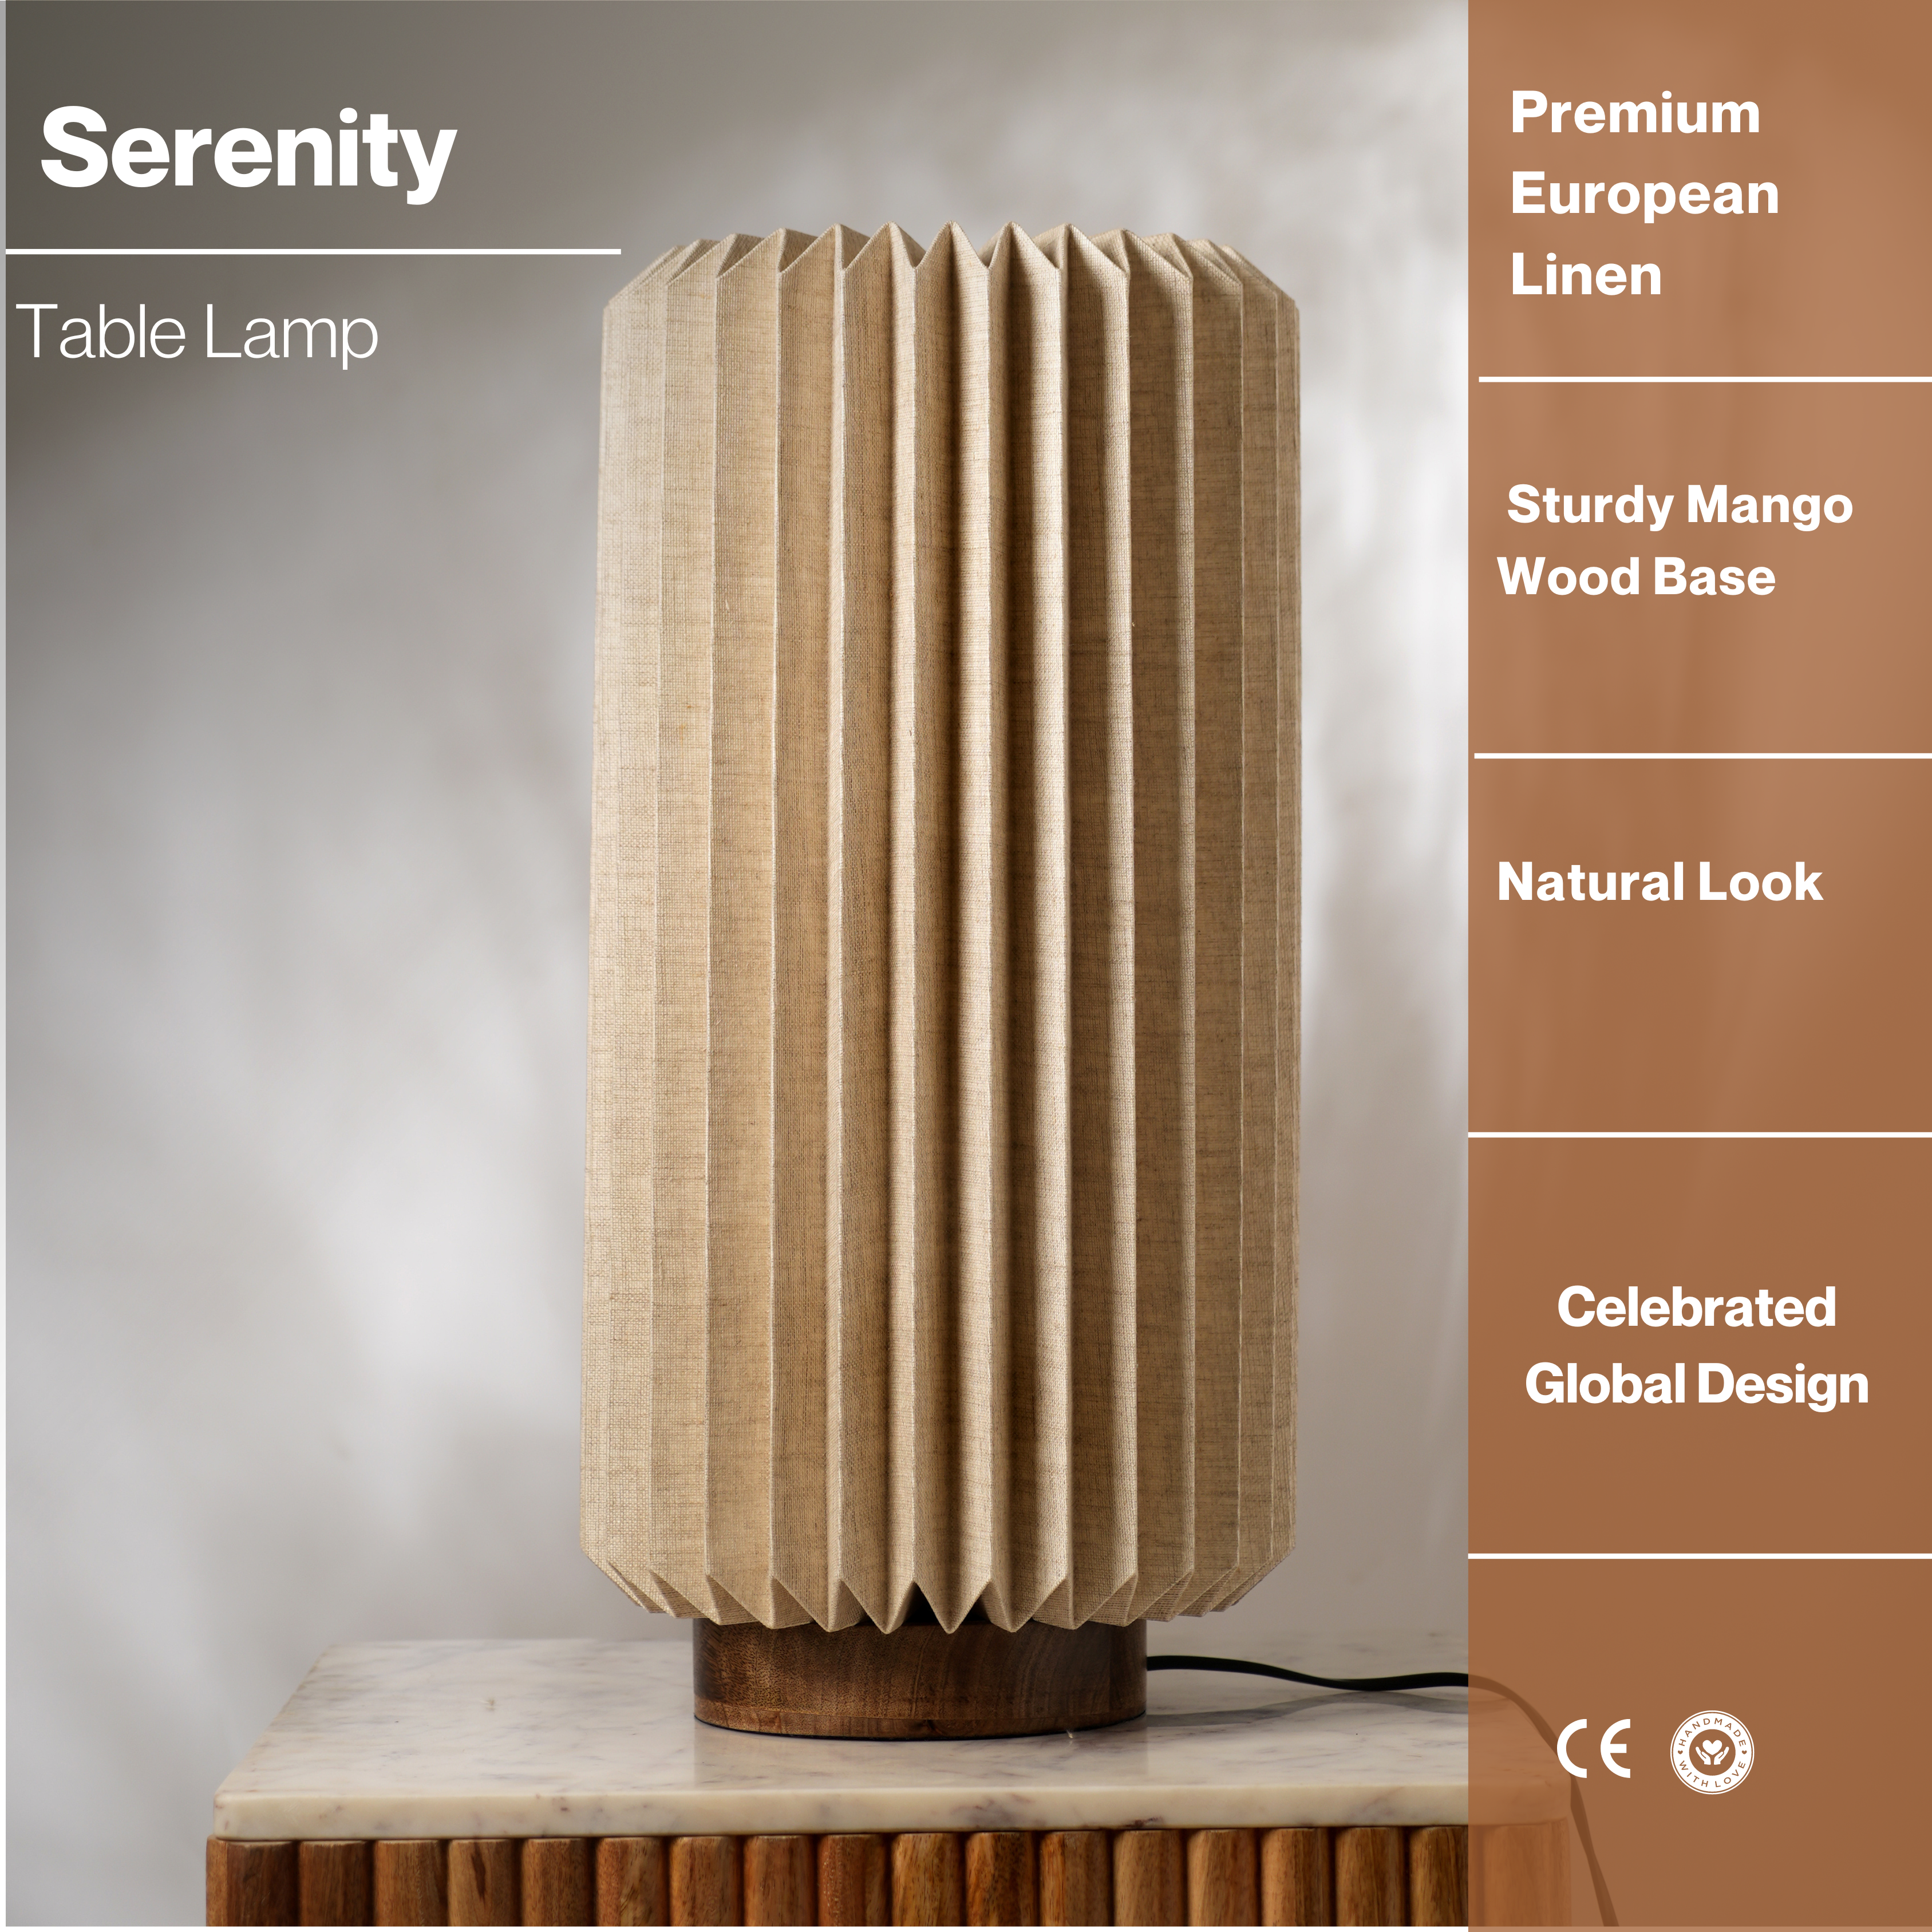 Serenity Table Lamp - Linen Table Lamp with Mango Wood Base